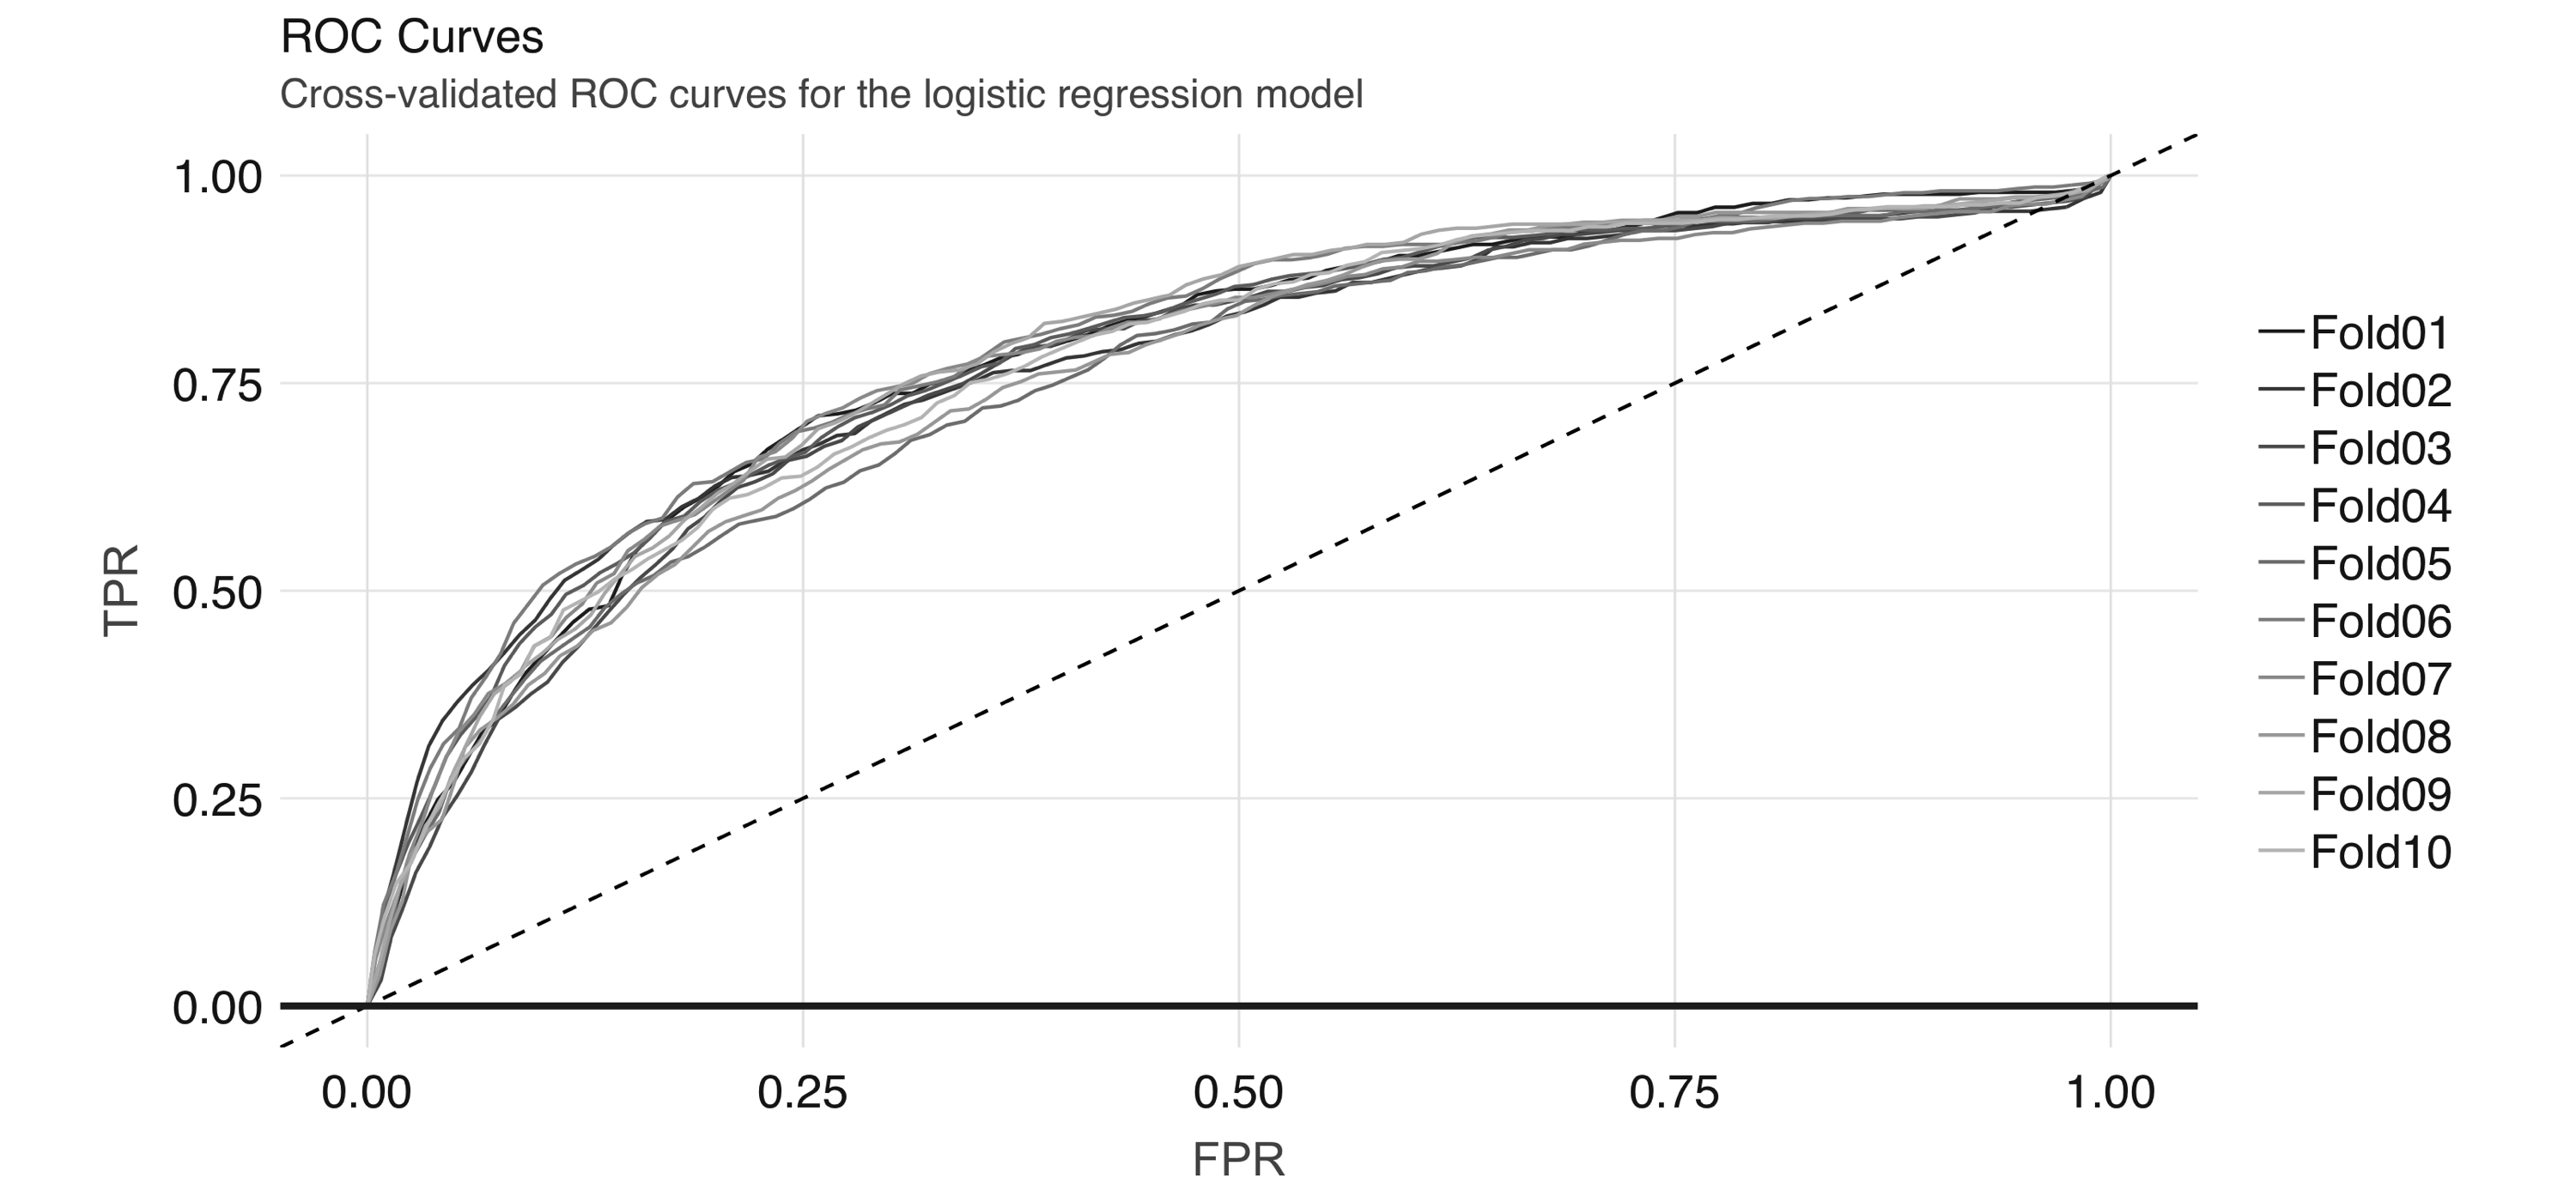 Cross-validated ROC curves for the logistic regression model